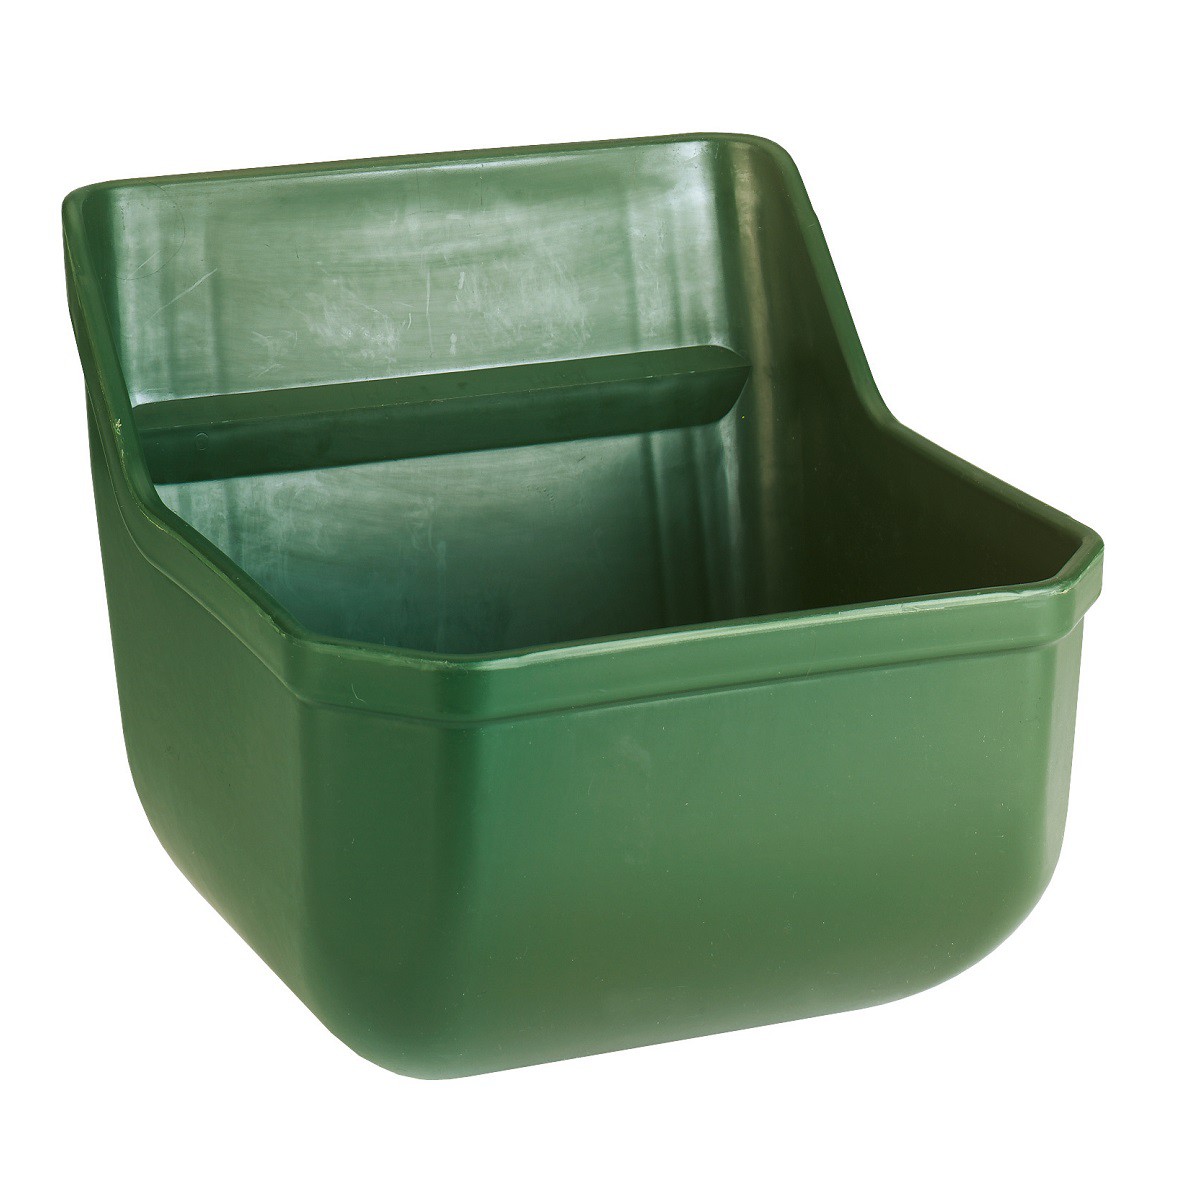 Trough for concentrated feed foal trough 9 litre